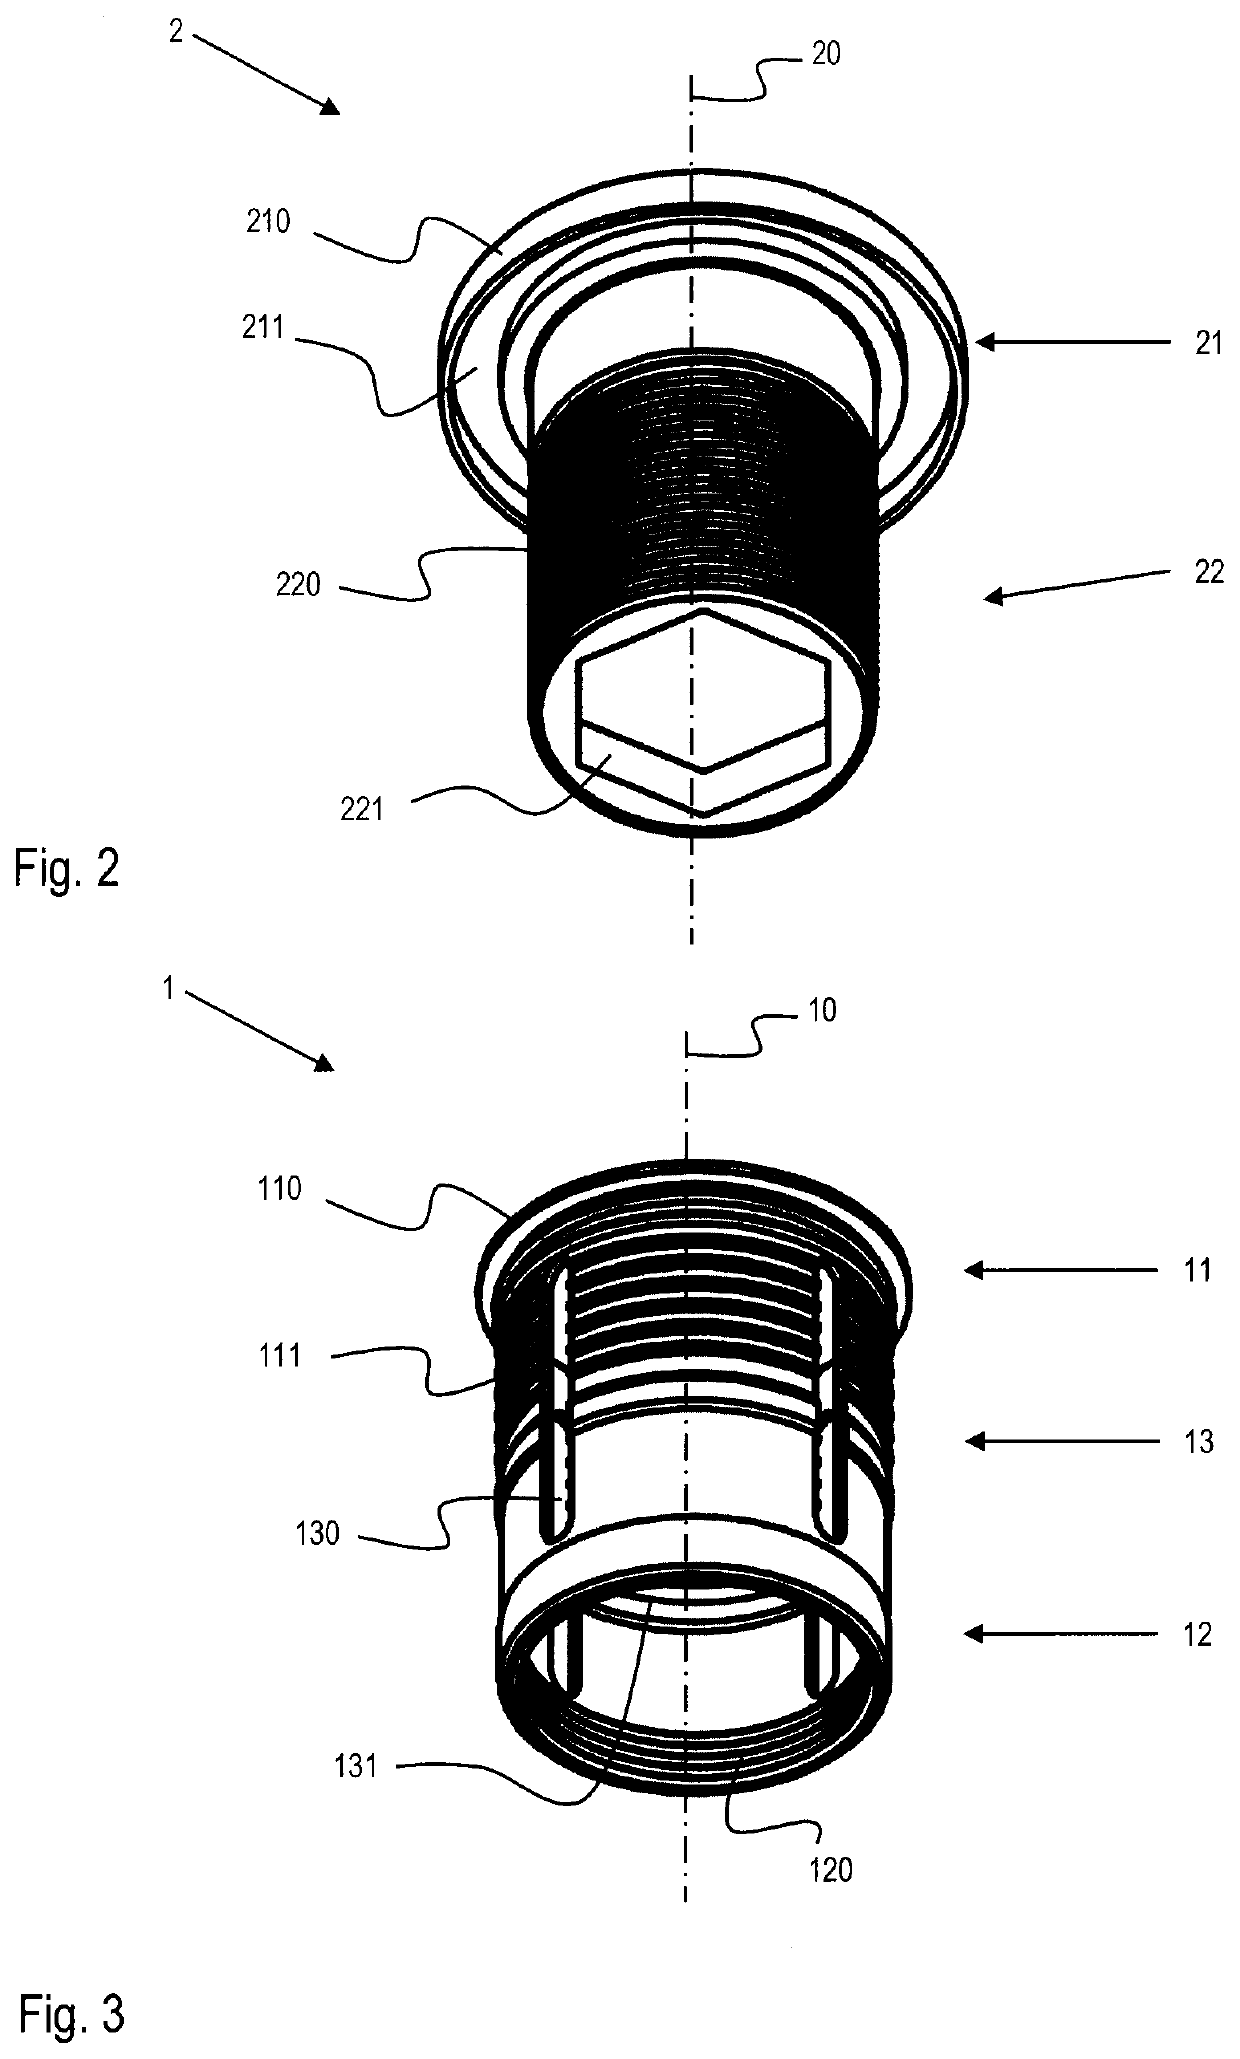 Installation apparatus consisting of a wall plug and a holder which can be screwed therein for installing flush-mounted devices